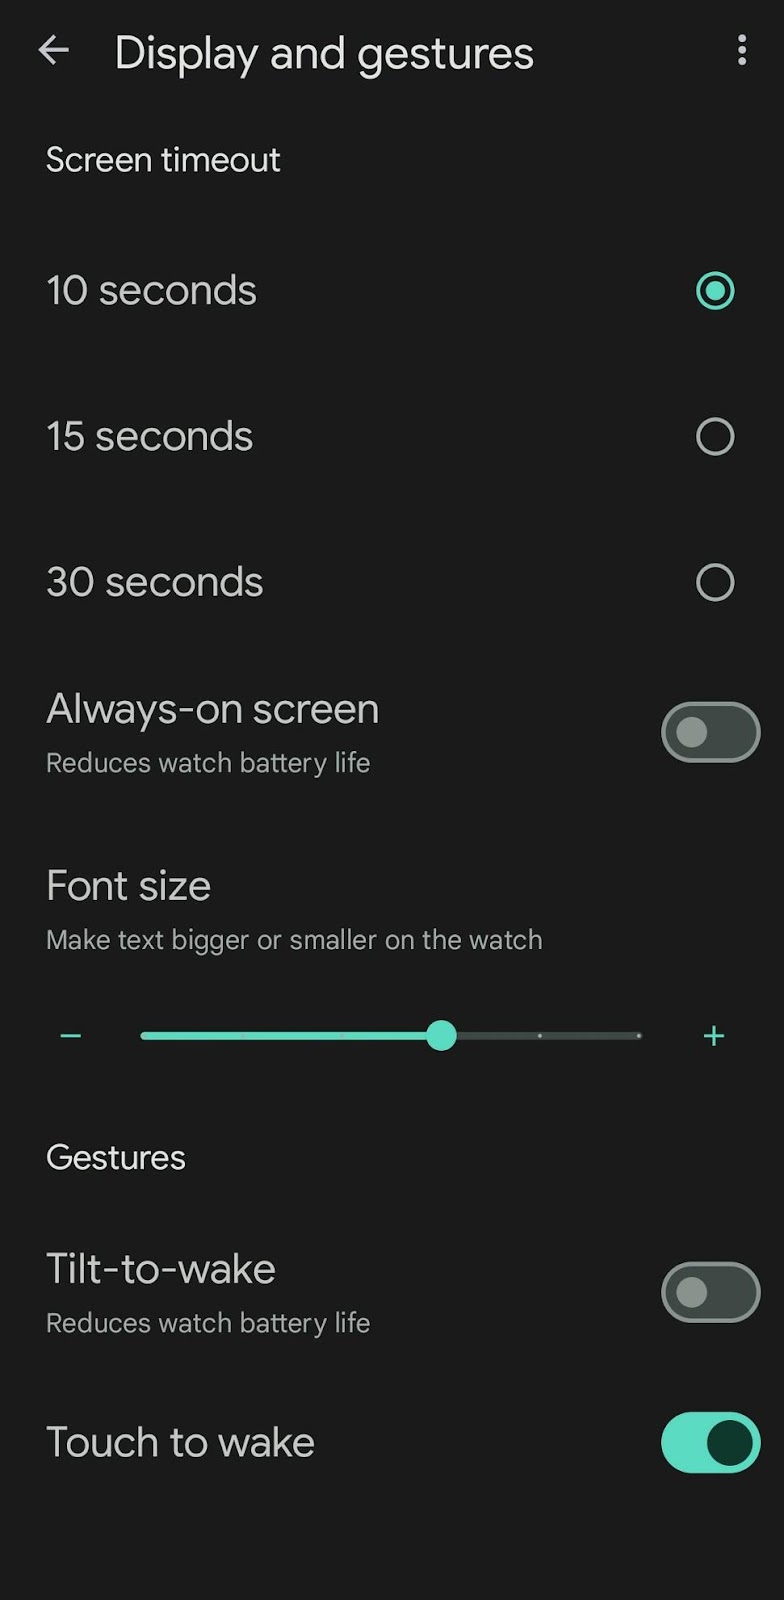 Display and gestures screen showing different screen timeouts, always on screen, font size, and gestures.